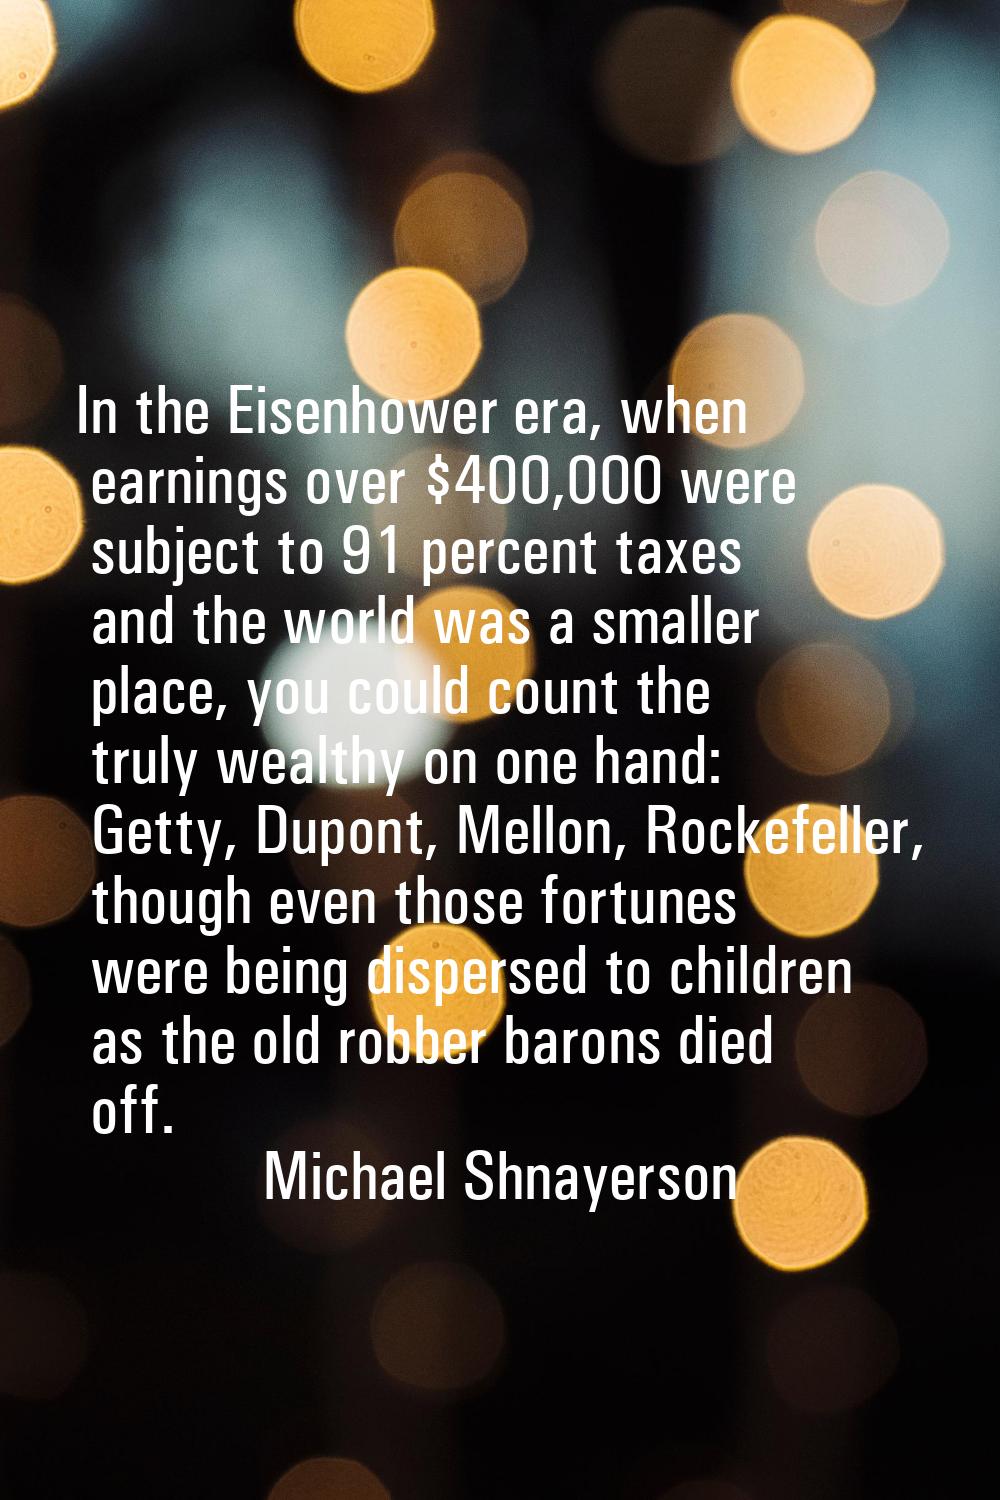 In the Eisenhower era, when earnings over $400,000 were subject to 91 percent taxes and the world w